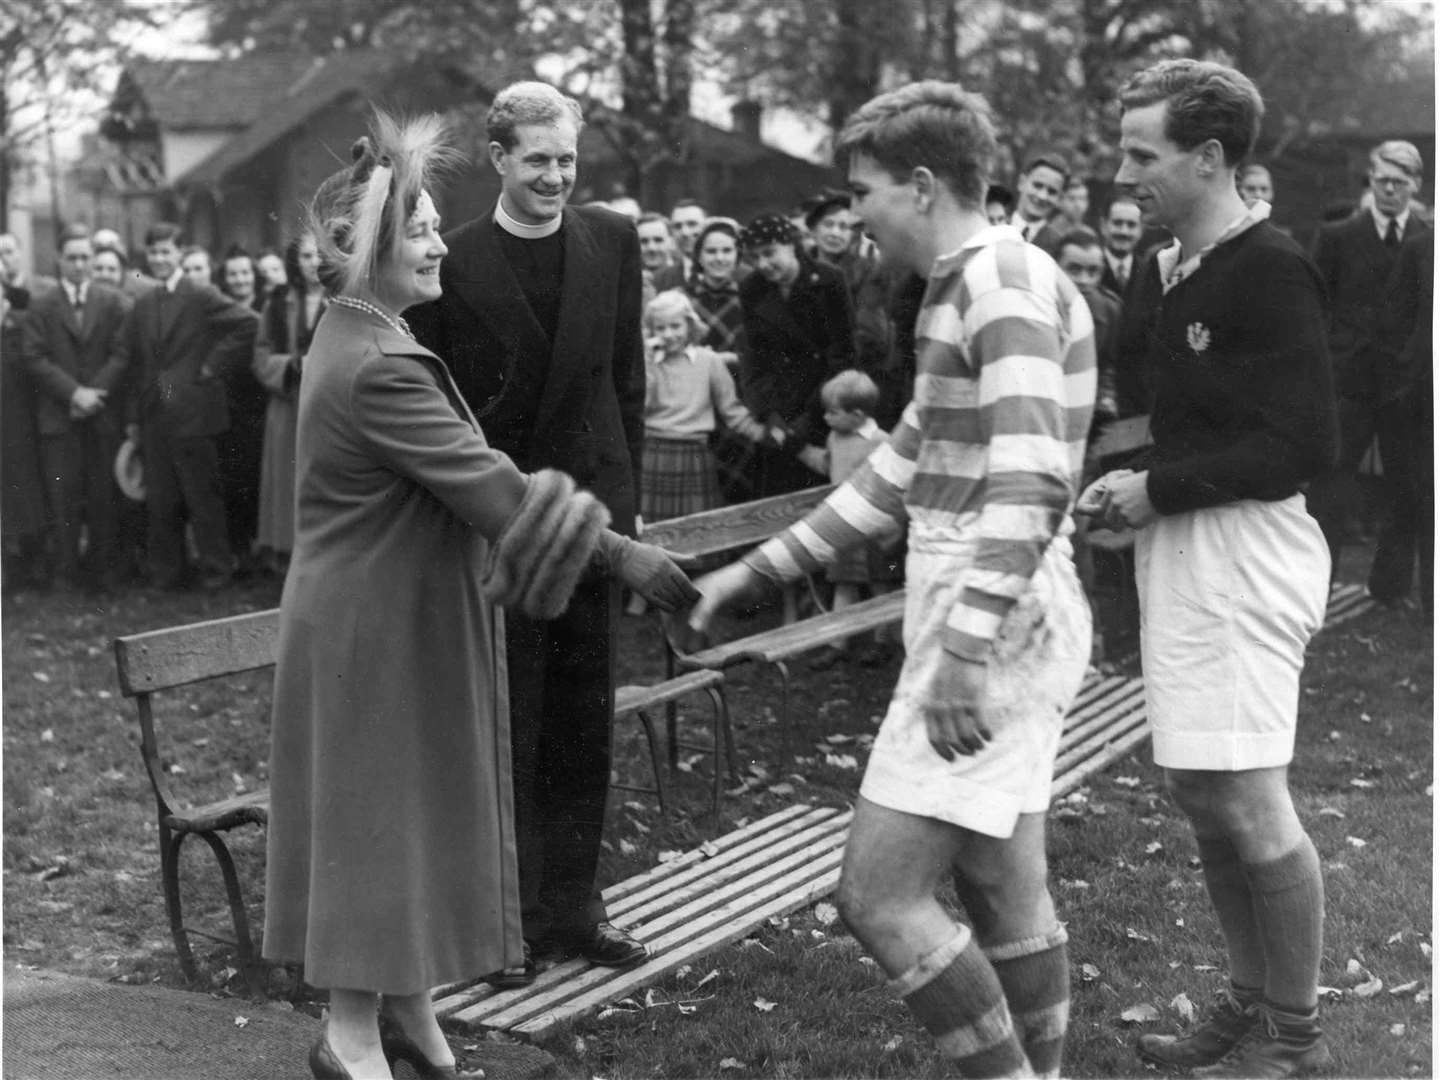 These rugby players met the Queen Mother when she visited Tonbridge School and opened a memorial gateway to mark its 400th anniversary in October 1953